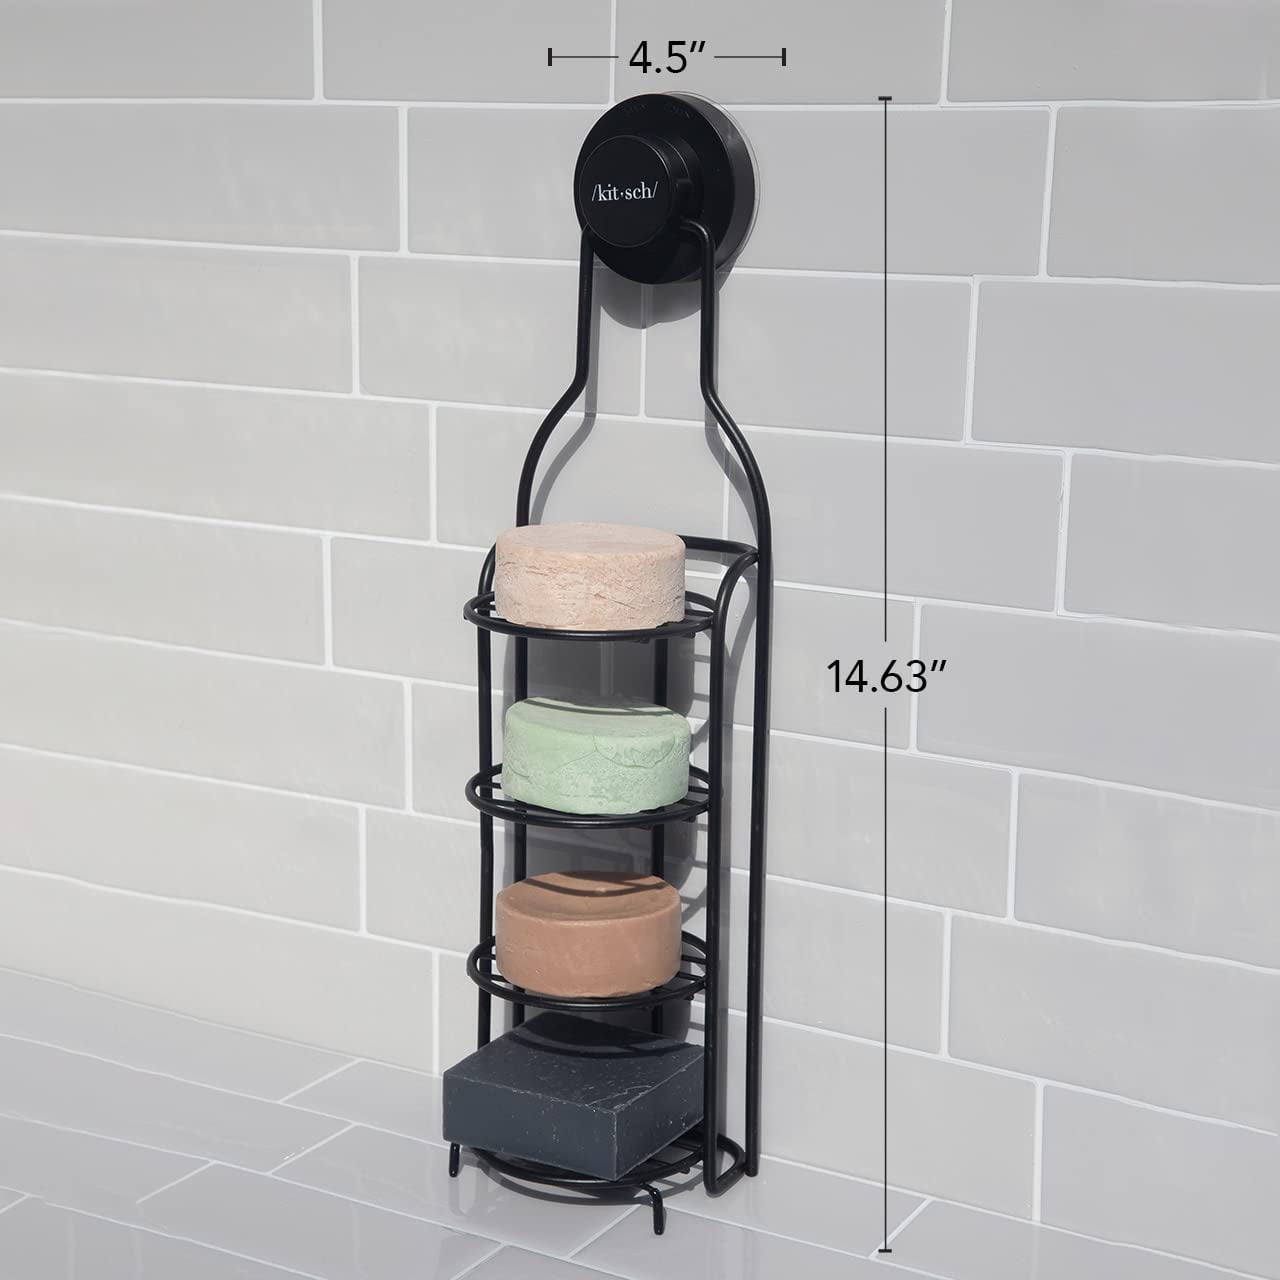 Review of #KITSCH Self-Draining Shower Caddy by Camryn, 19 votes